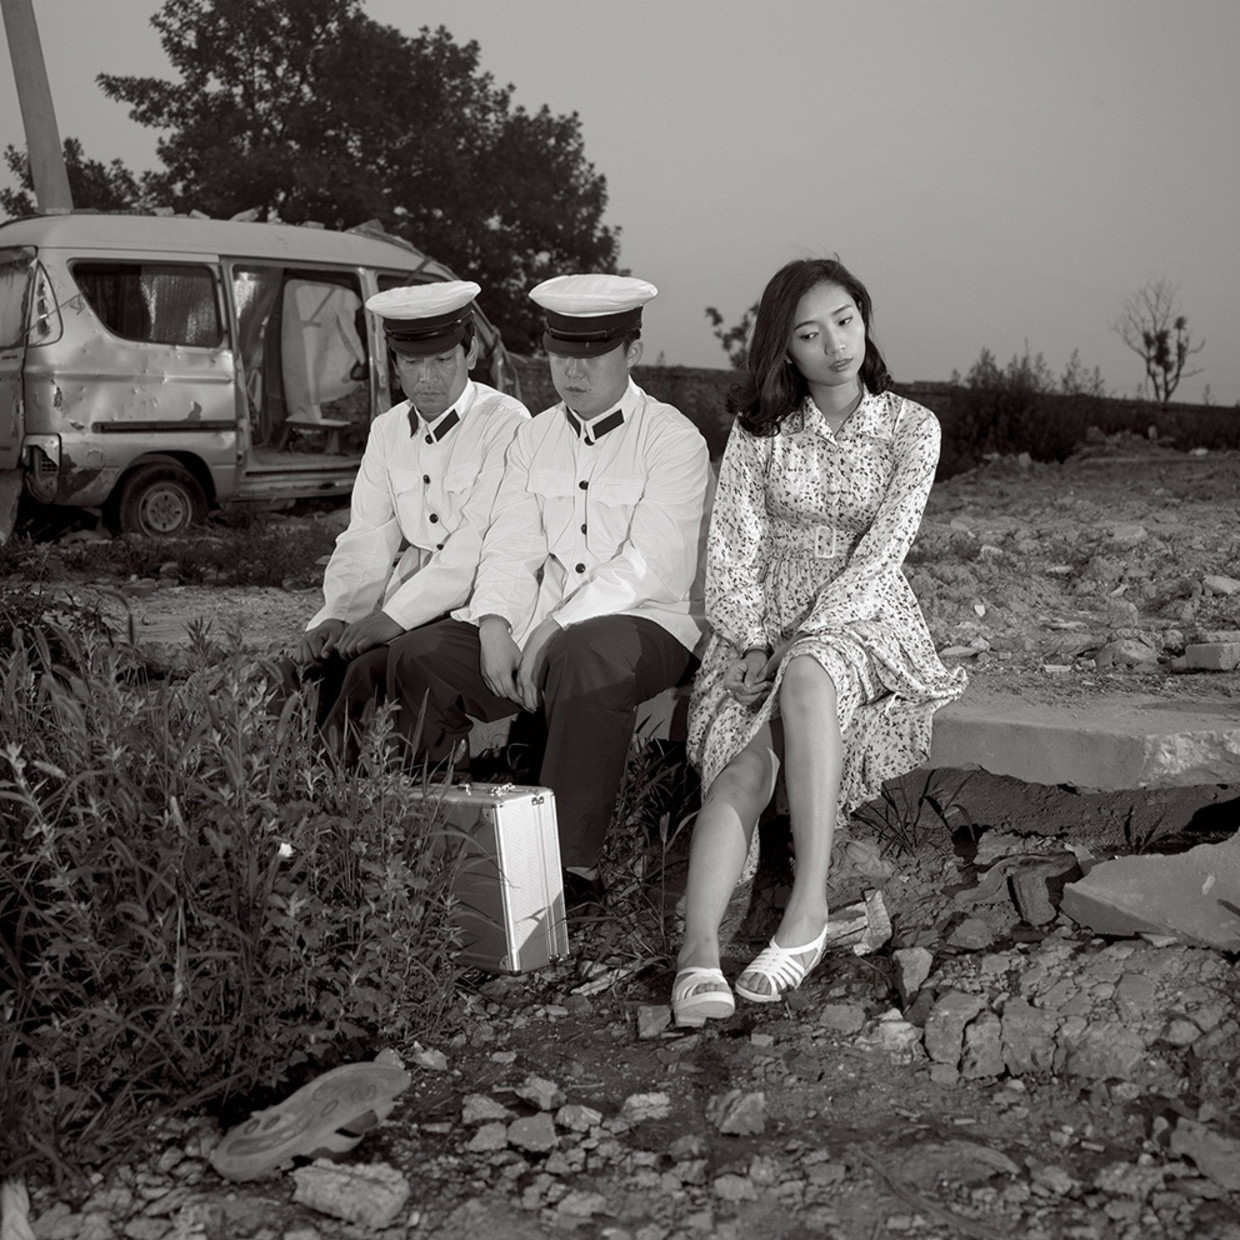 Midday Sun Artists: Zhou Yulong Curator: Shen Qilan They say that there is nothing new under the sun, but Zhou...